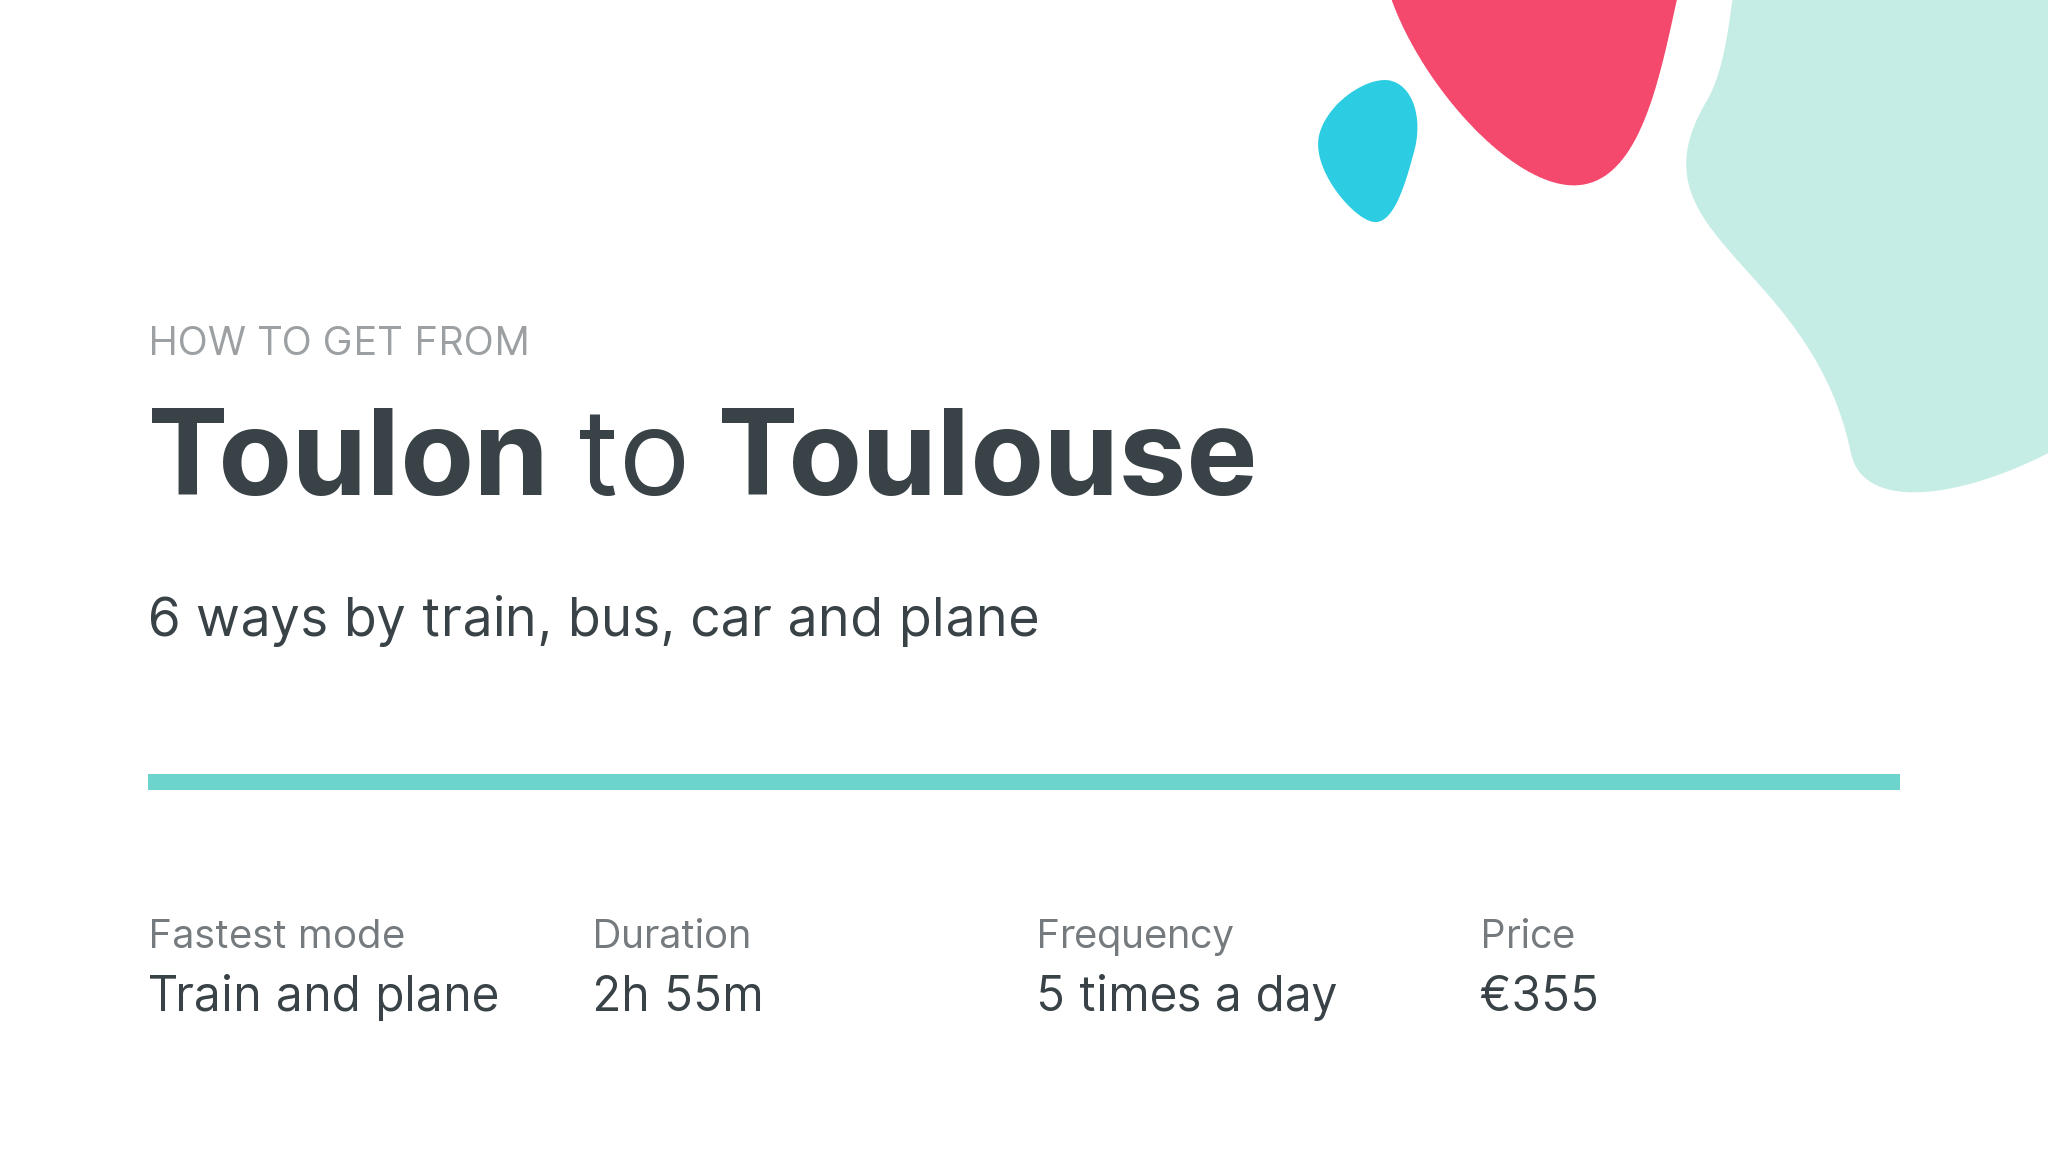 How do I get from Toulon to Toulouse